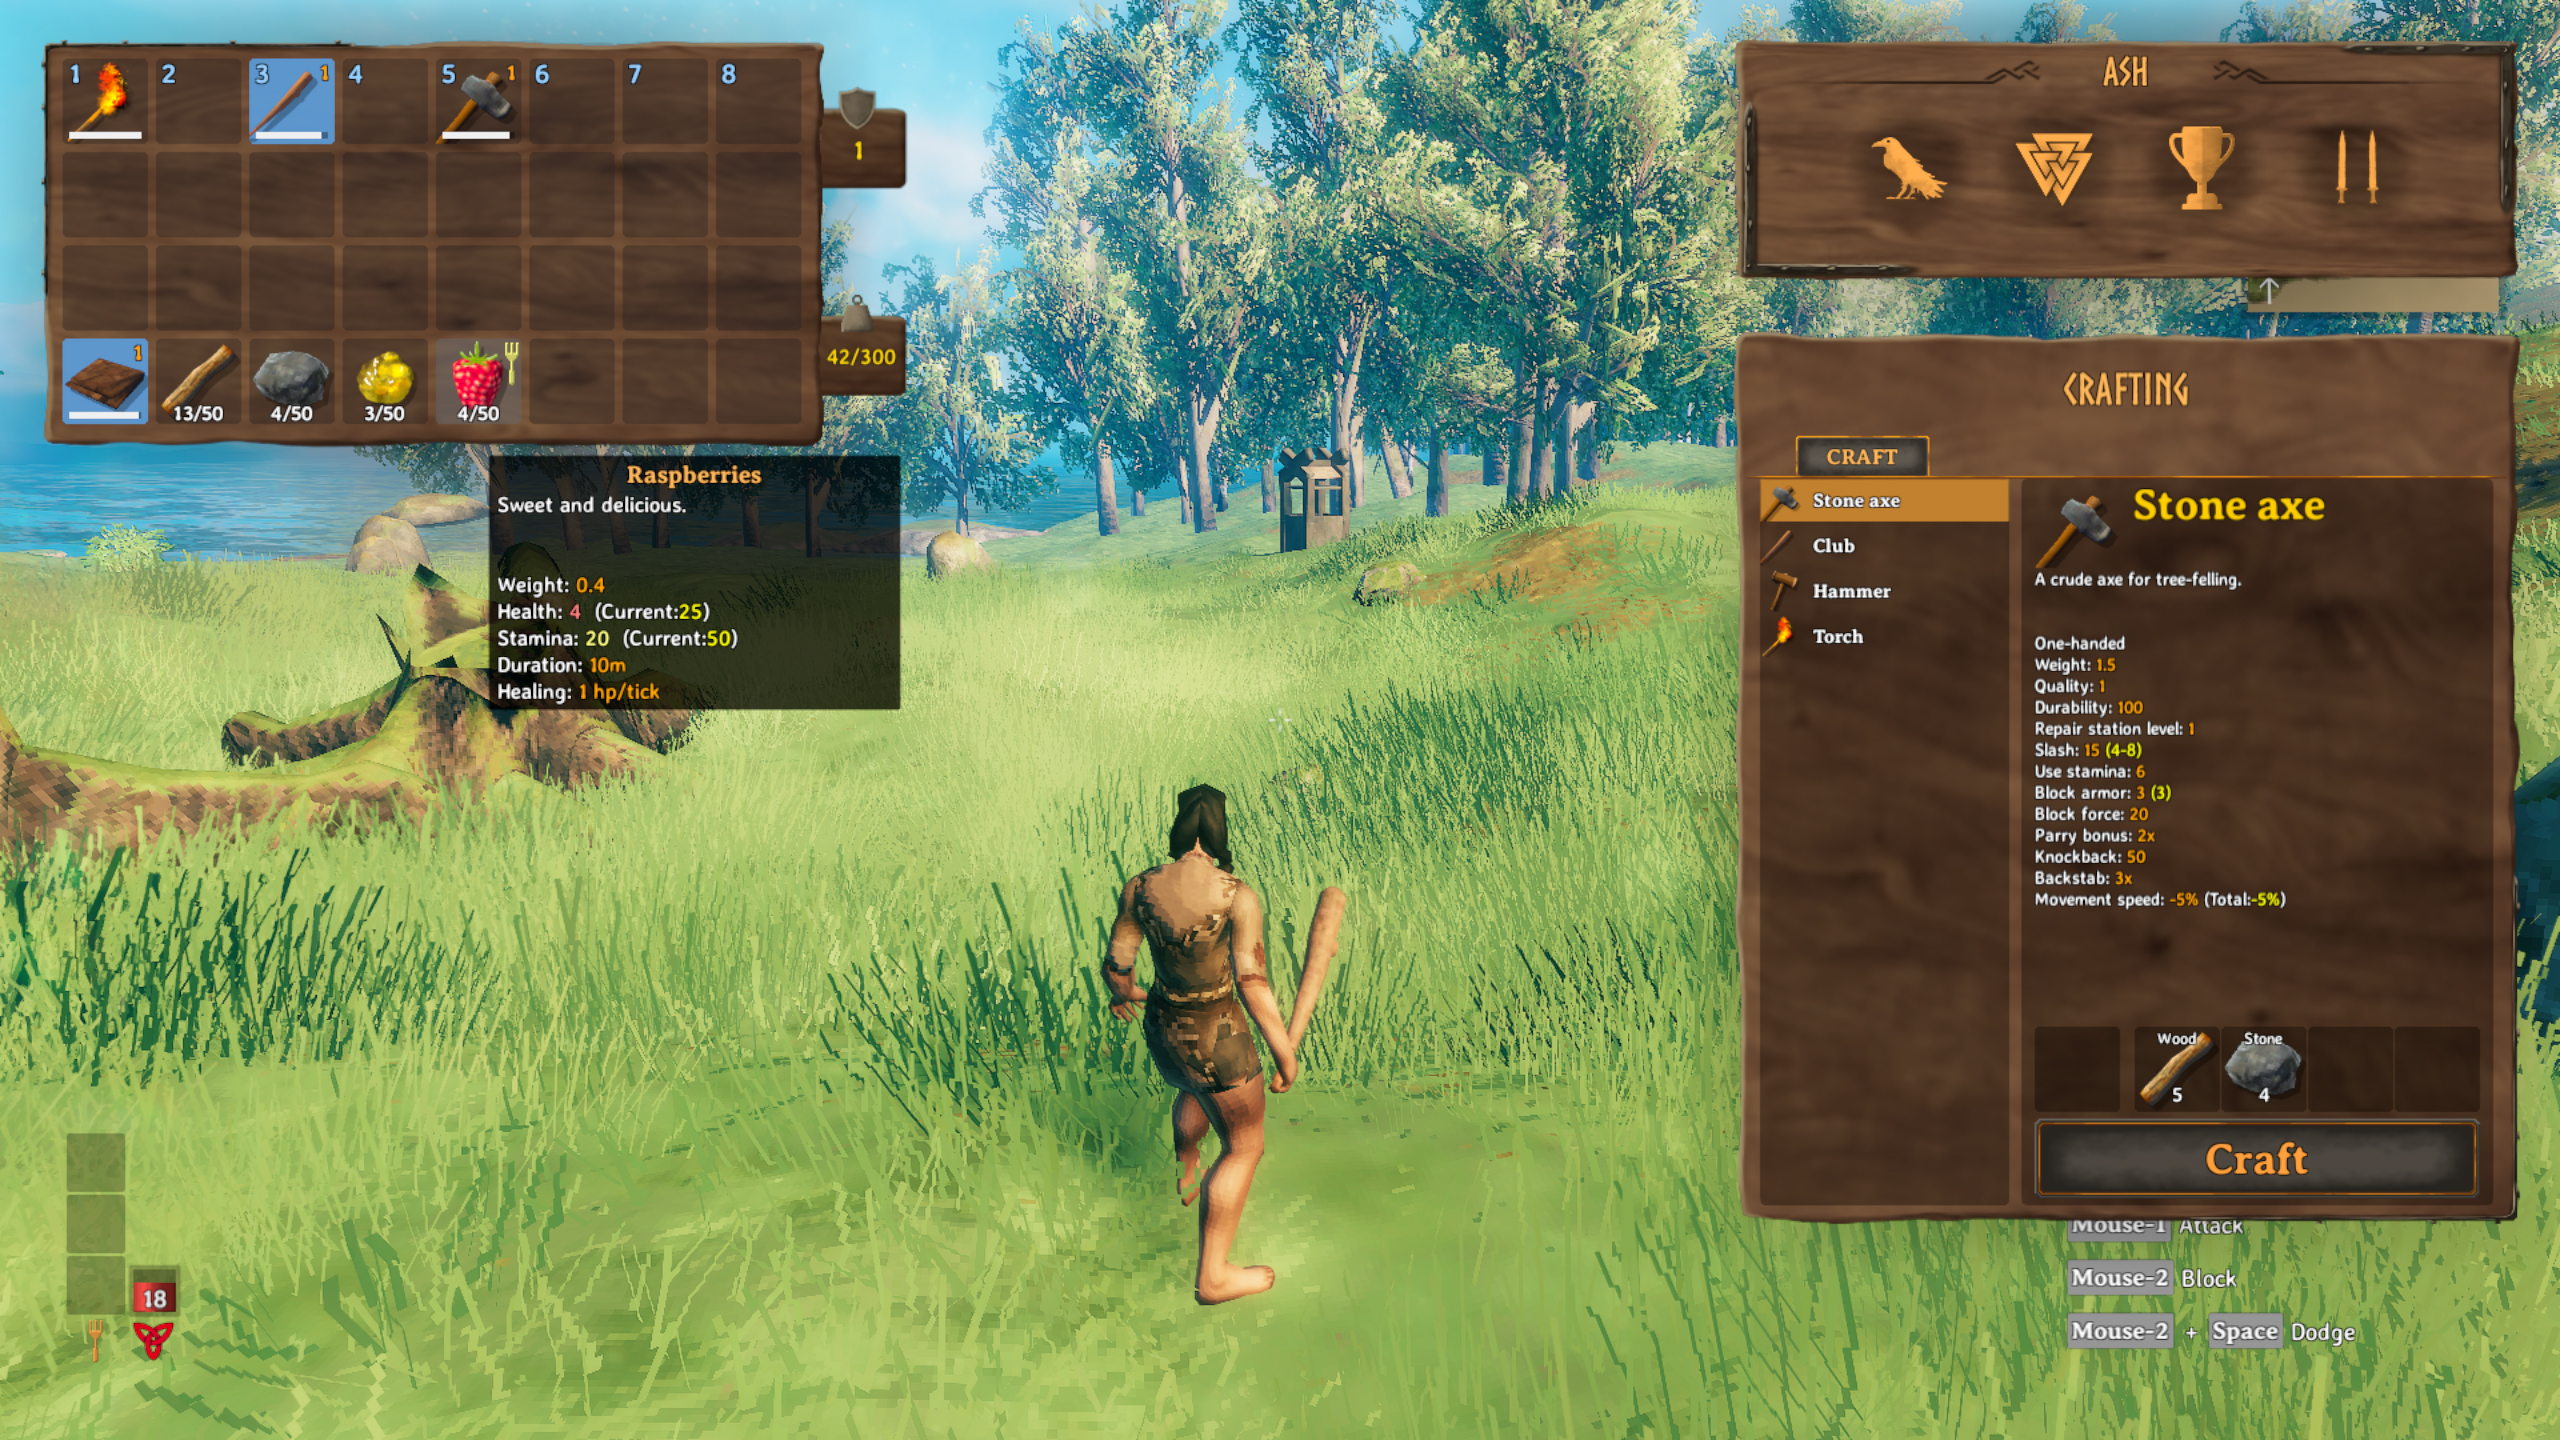 Valheim inventory shows the tooltip for raspberries